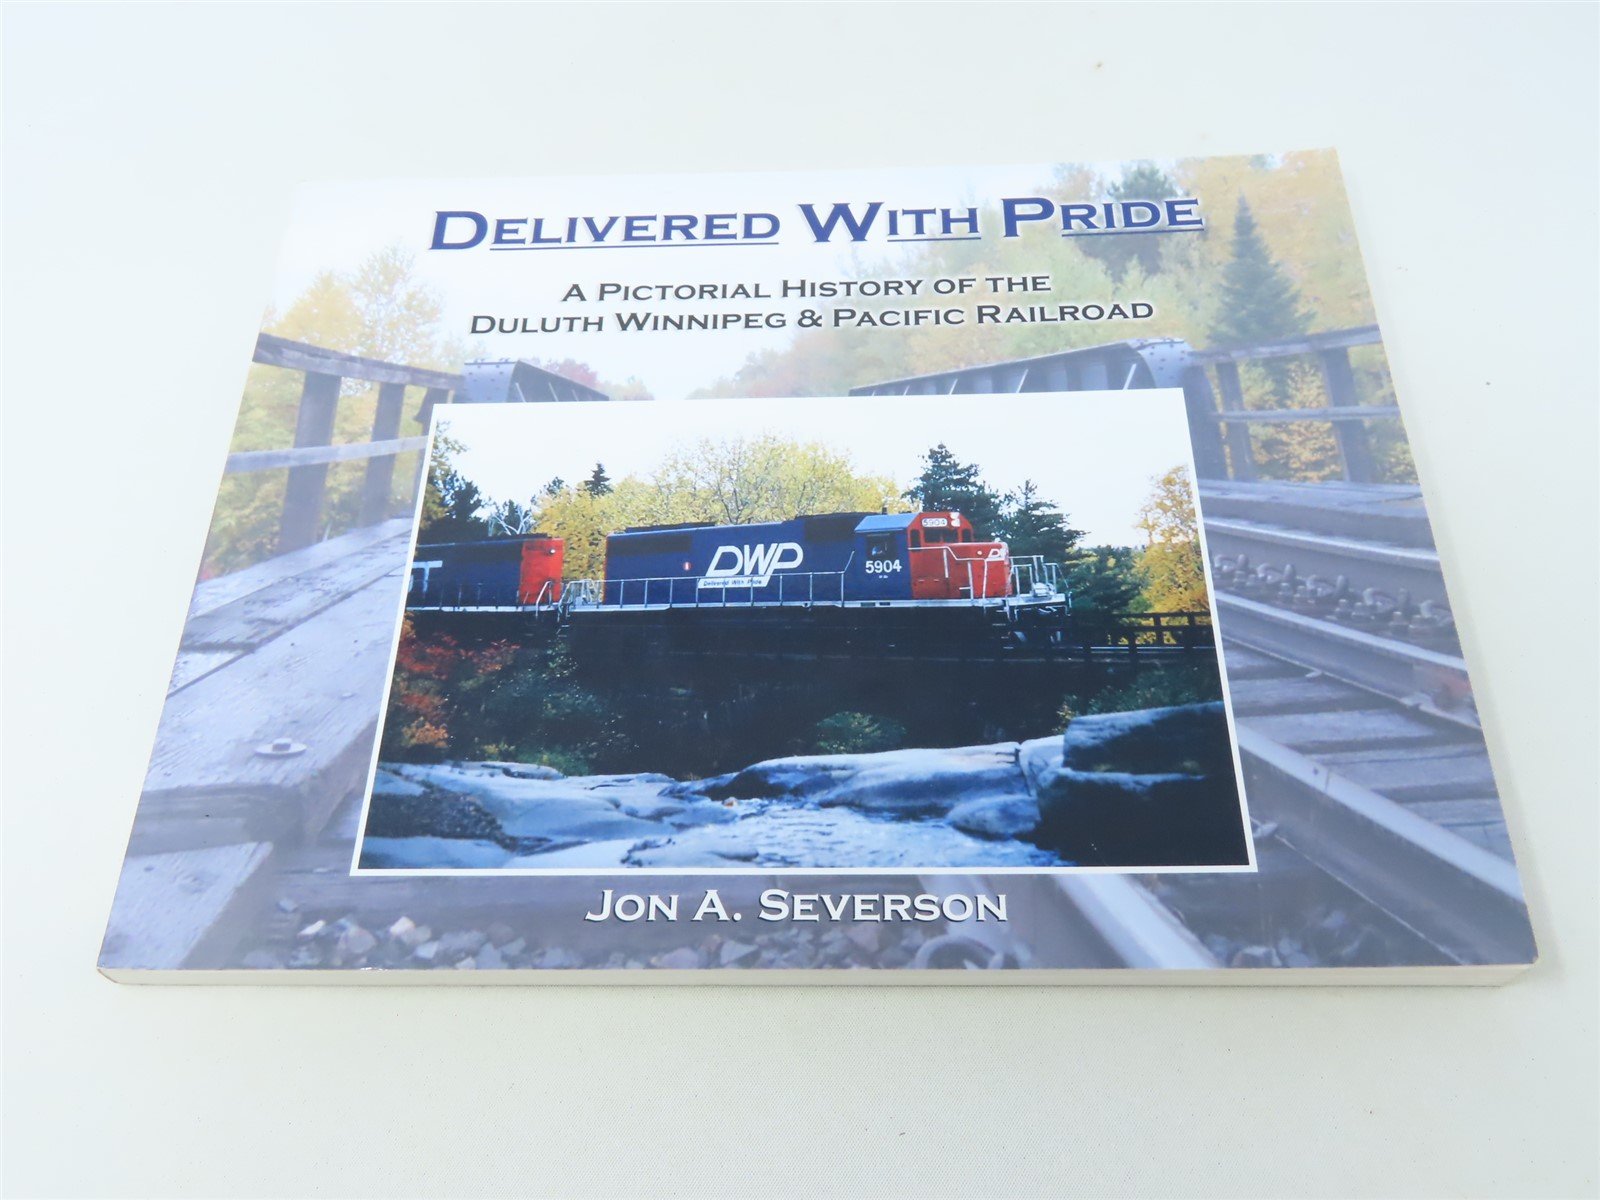 Delivered With Pride by Jon A. Severson ©2008 SC Book